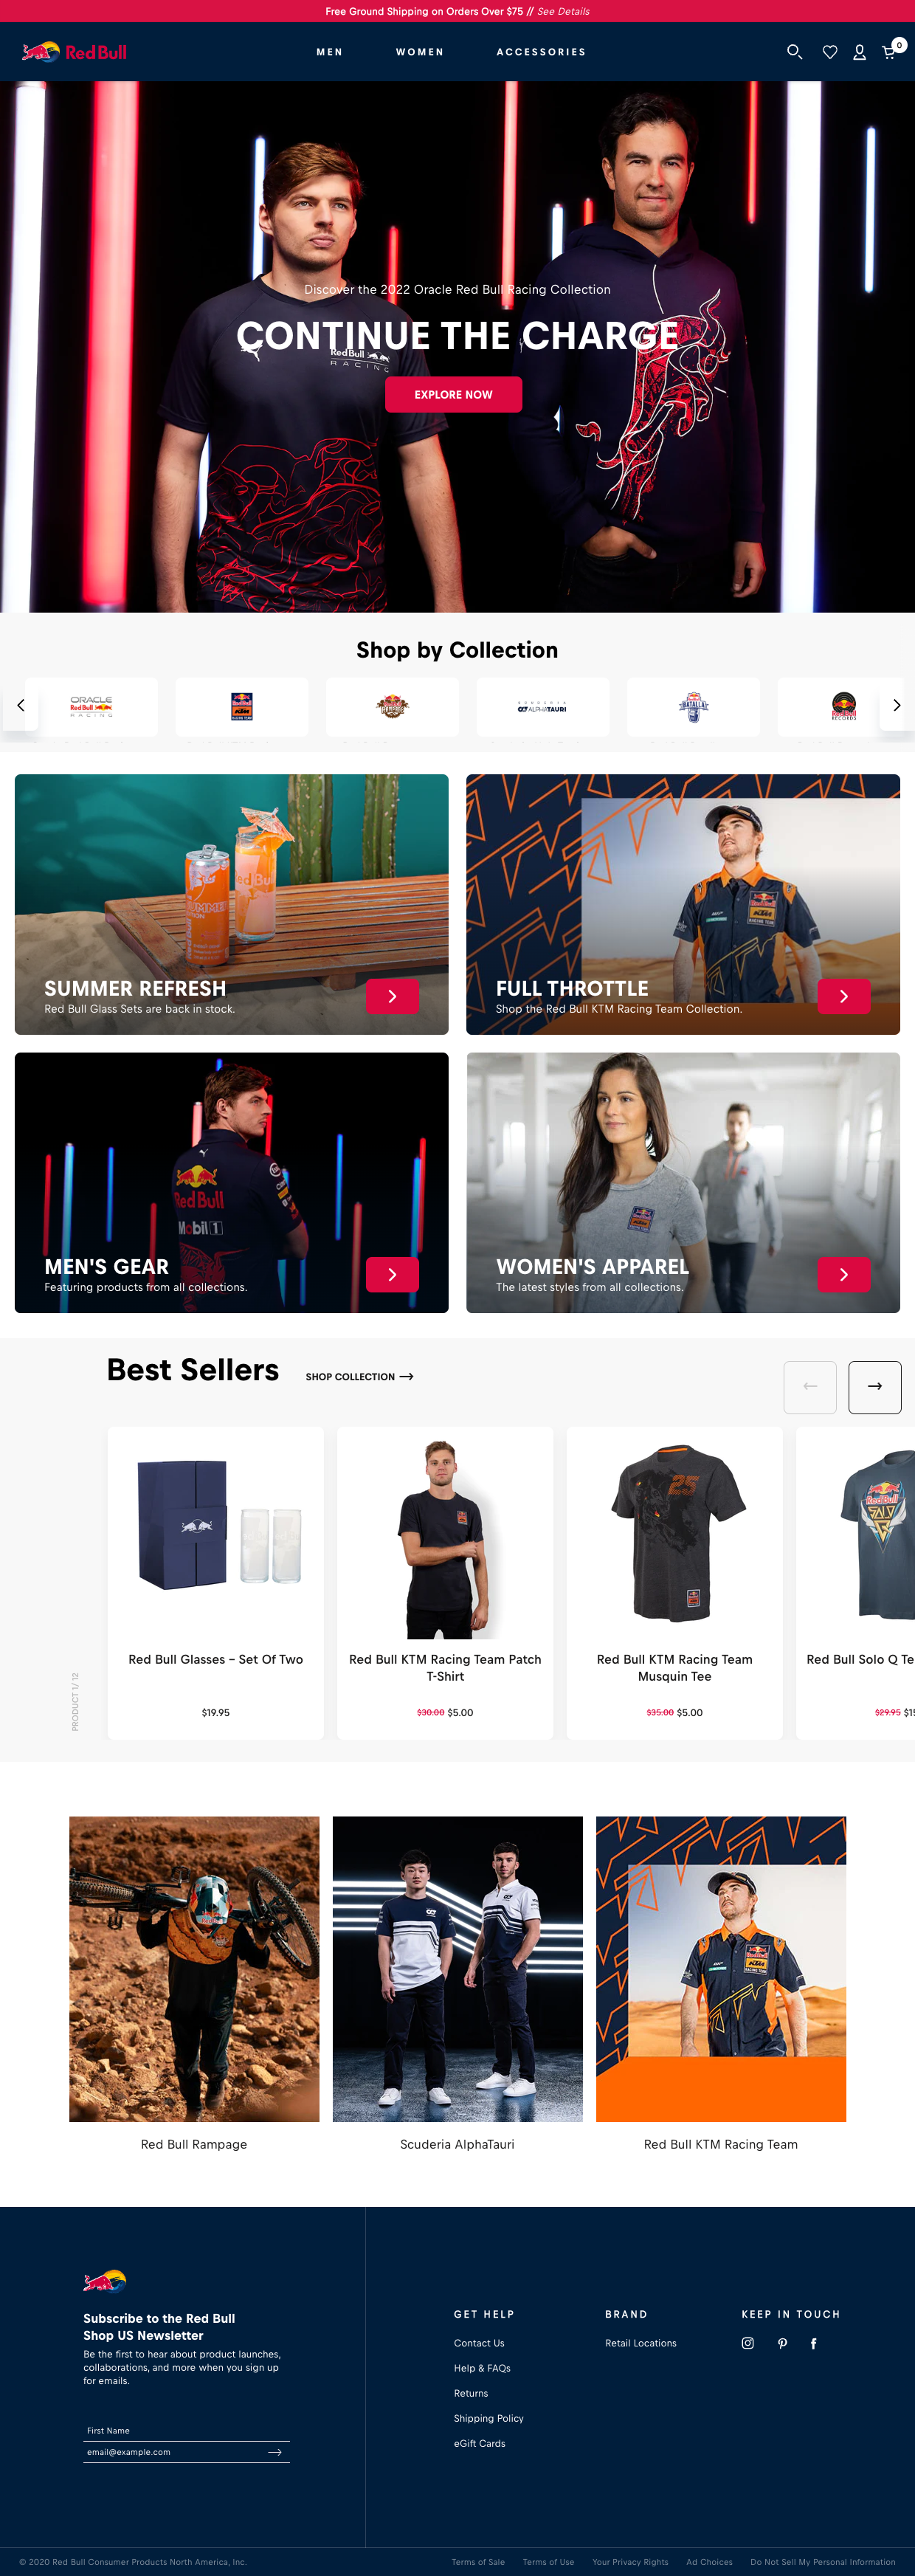 Red Bull Shopify Store